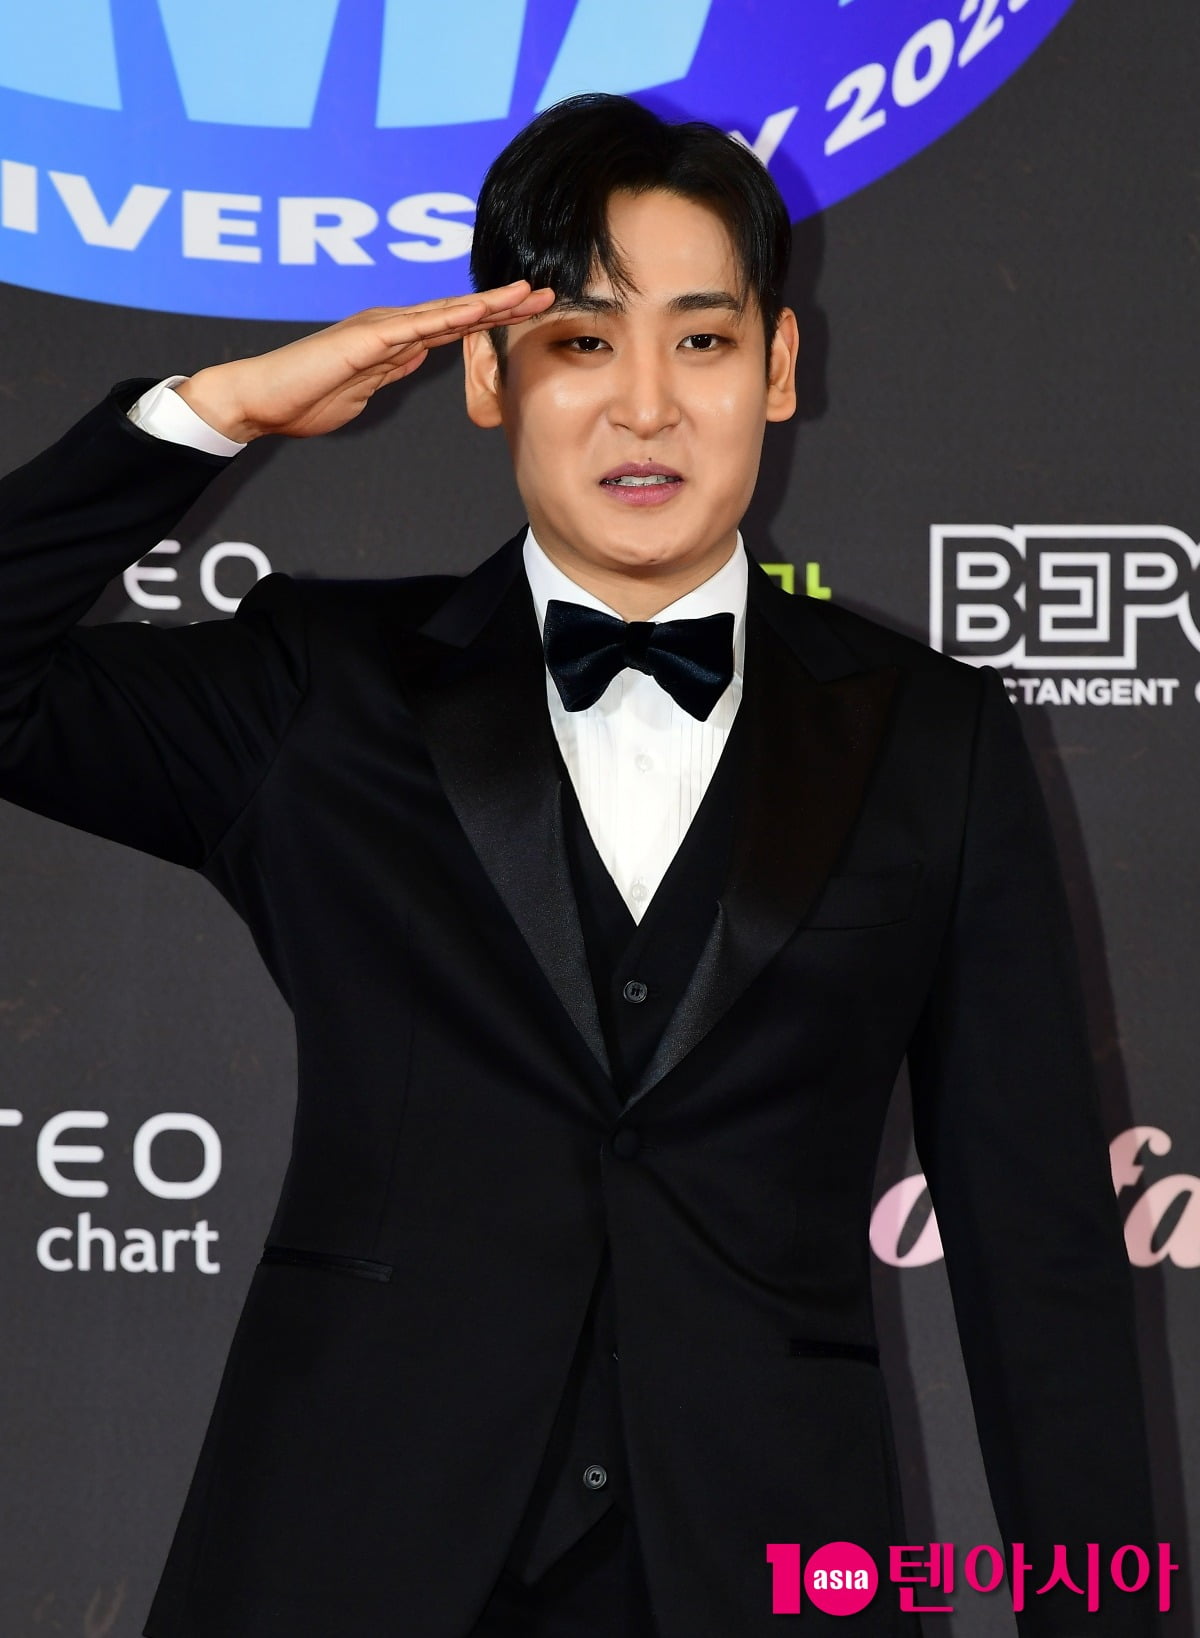 Park Jae-jung will enlist in the military on May 21st.